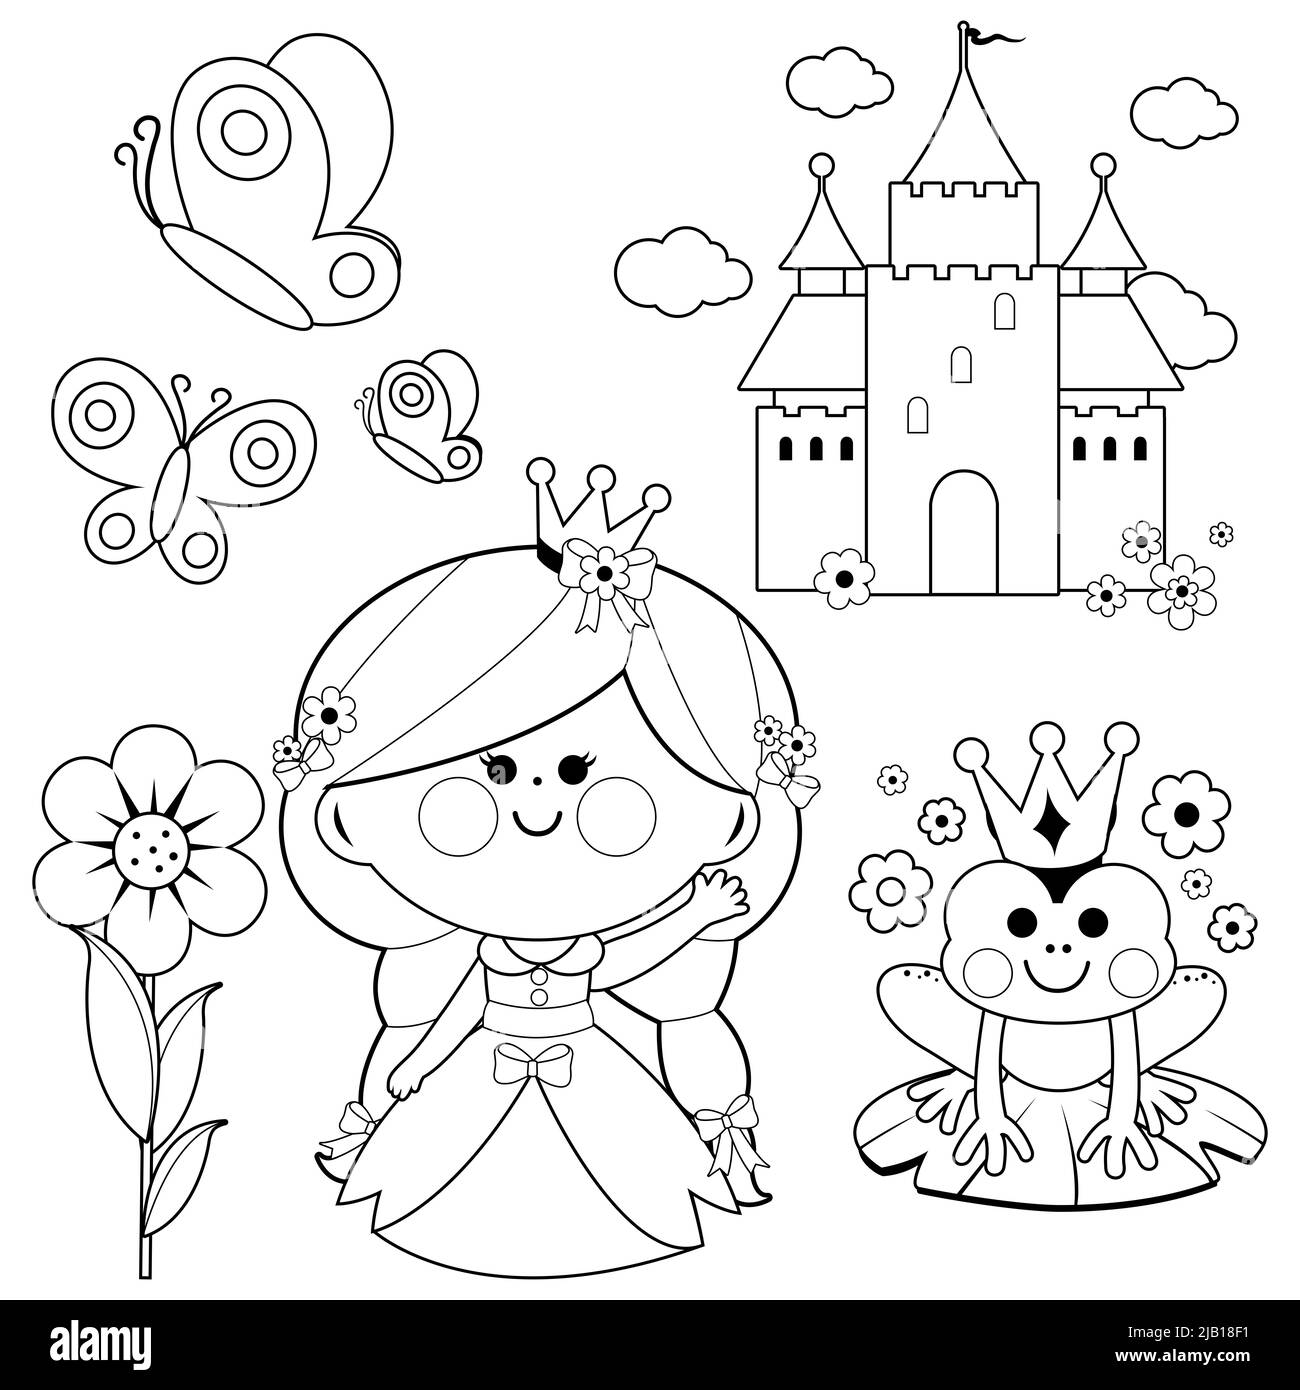 Beautiful princess holding spring flowers, unicorn, a magical frog, castle and butterflies. Black and white coloring page Stock Photo